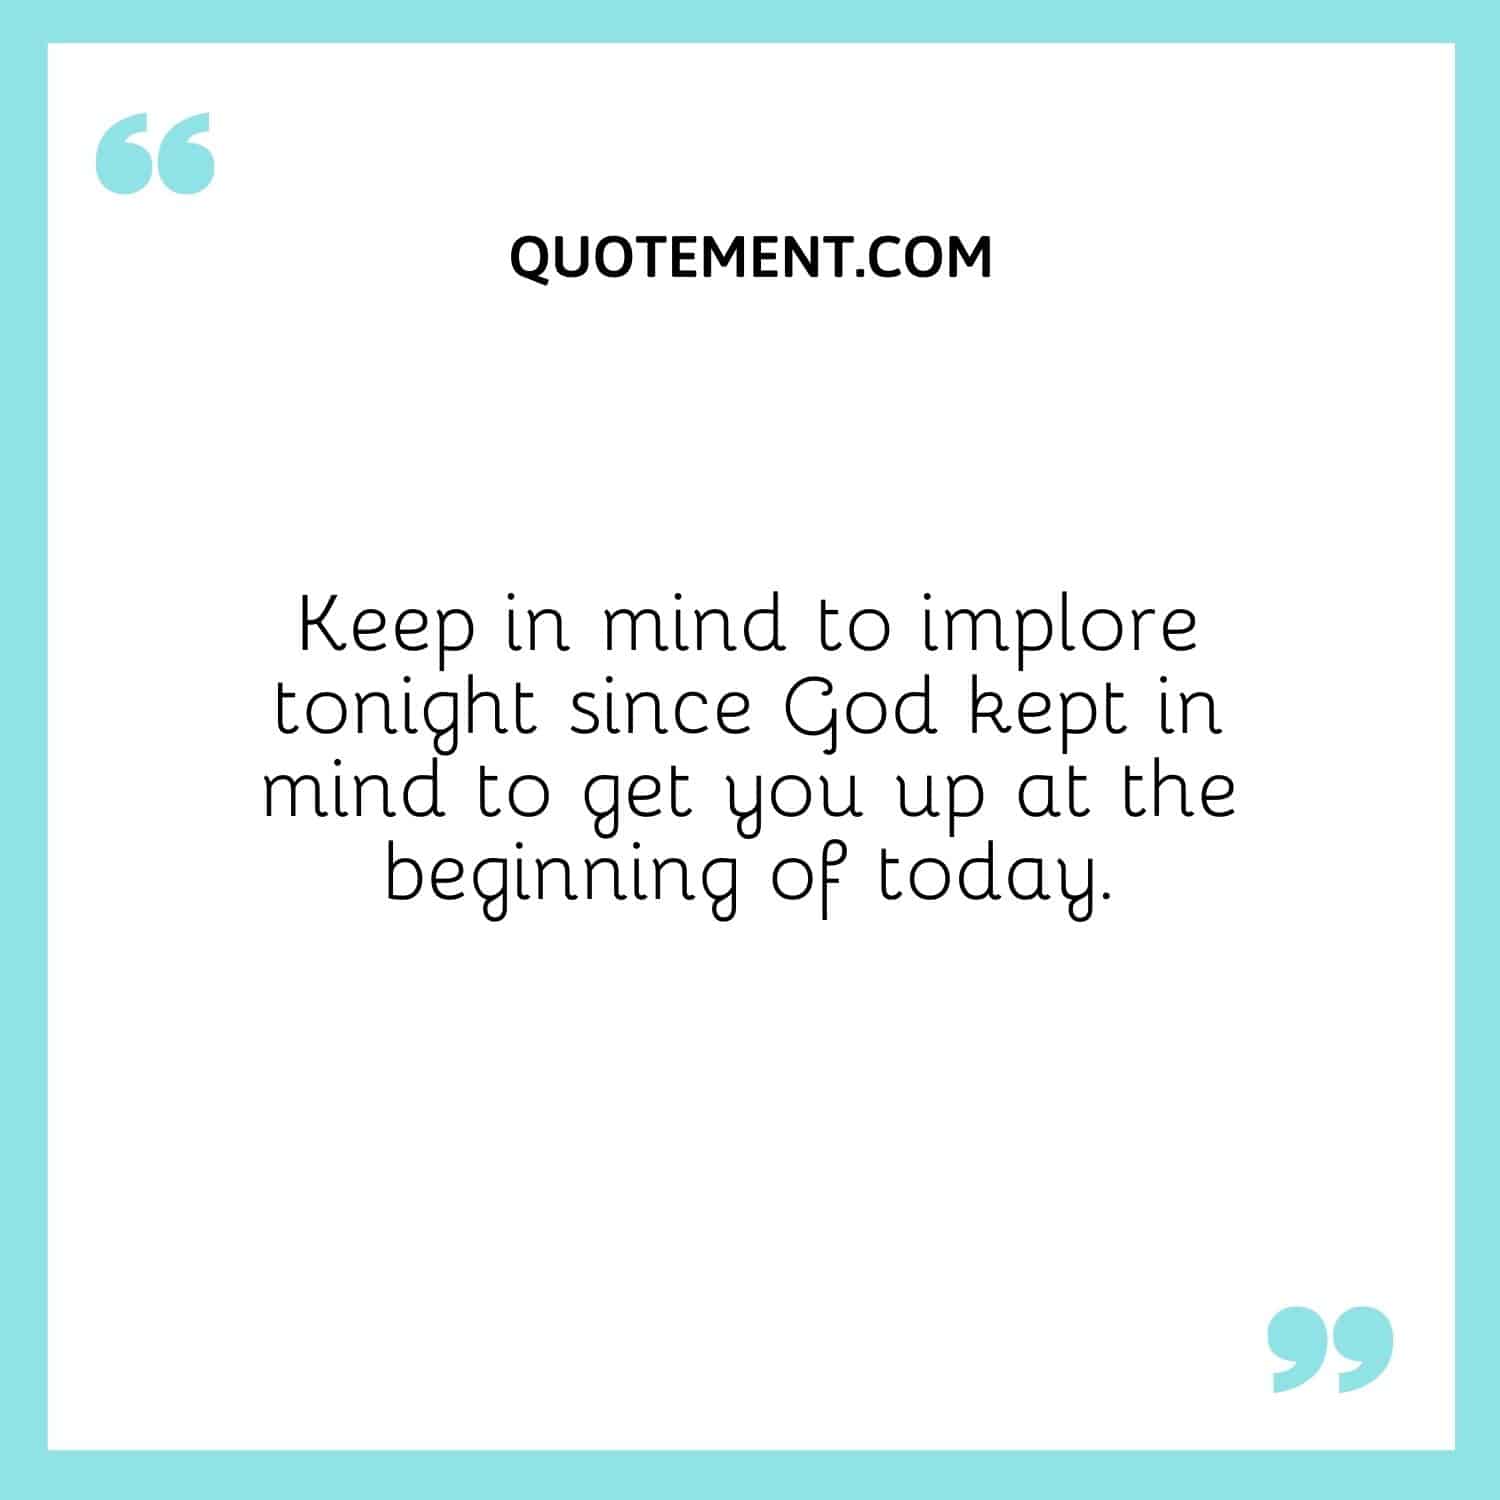 Keep in mind to implore tonight since God kept in mind to get you up at the beginning of today